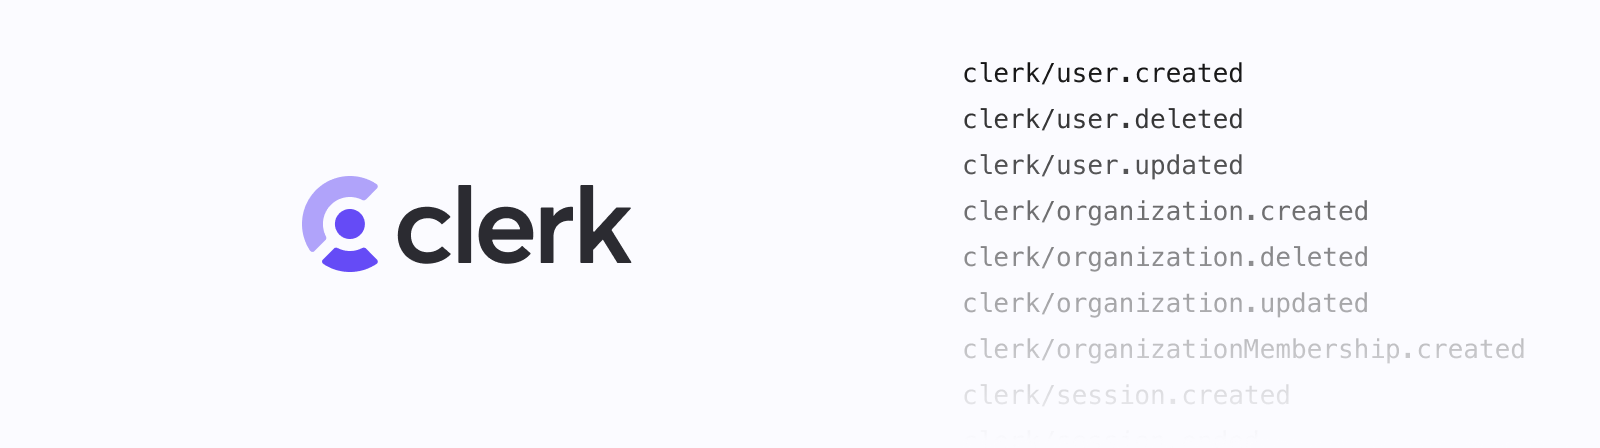 Clerk logo and graphic showing Clerk webhook events